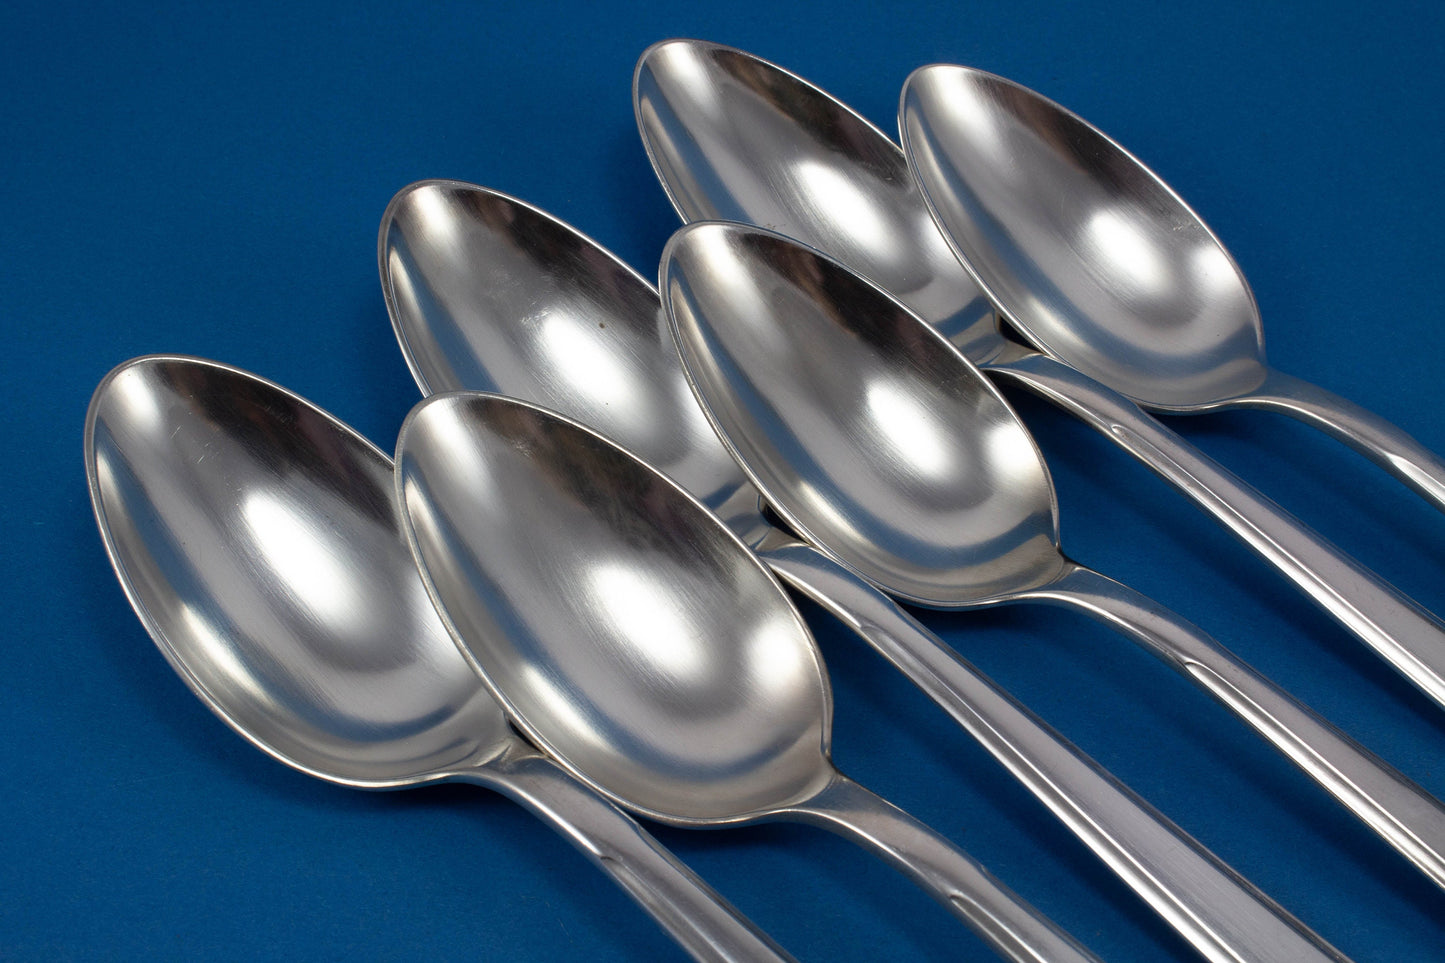 6 silver-plated table spoons, tablespoons by Bruckmann, Swabian pattern